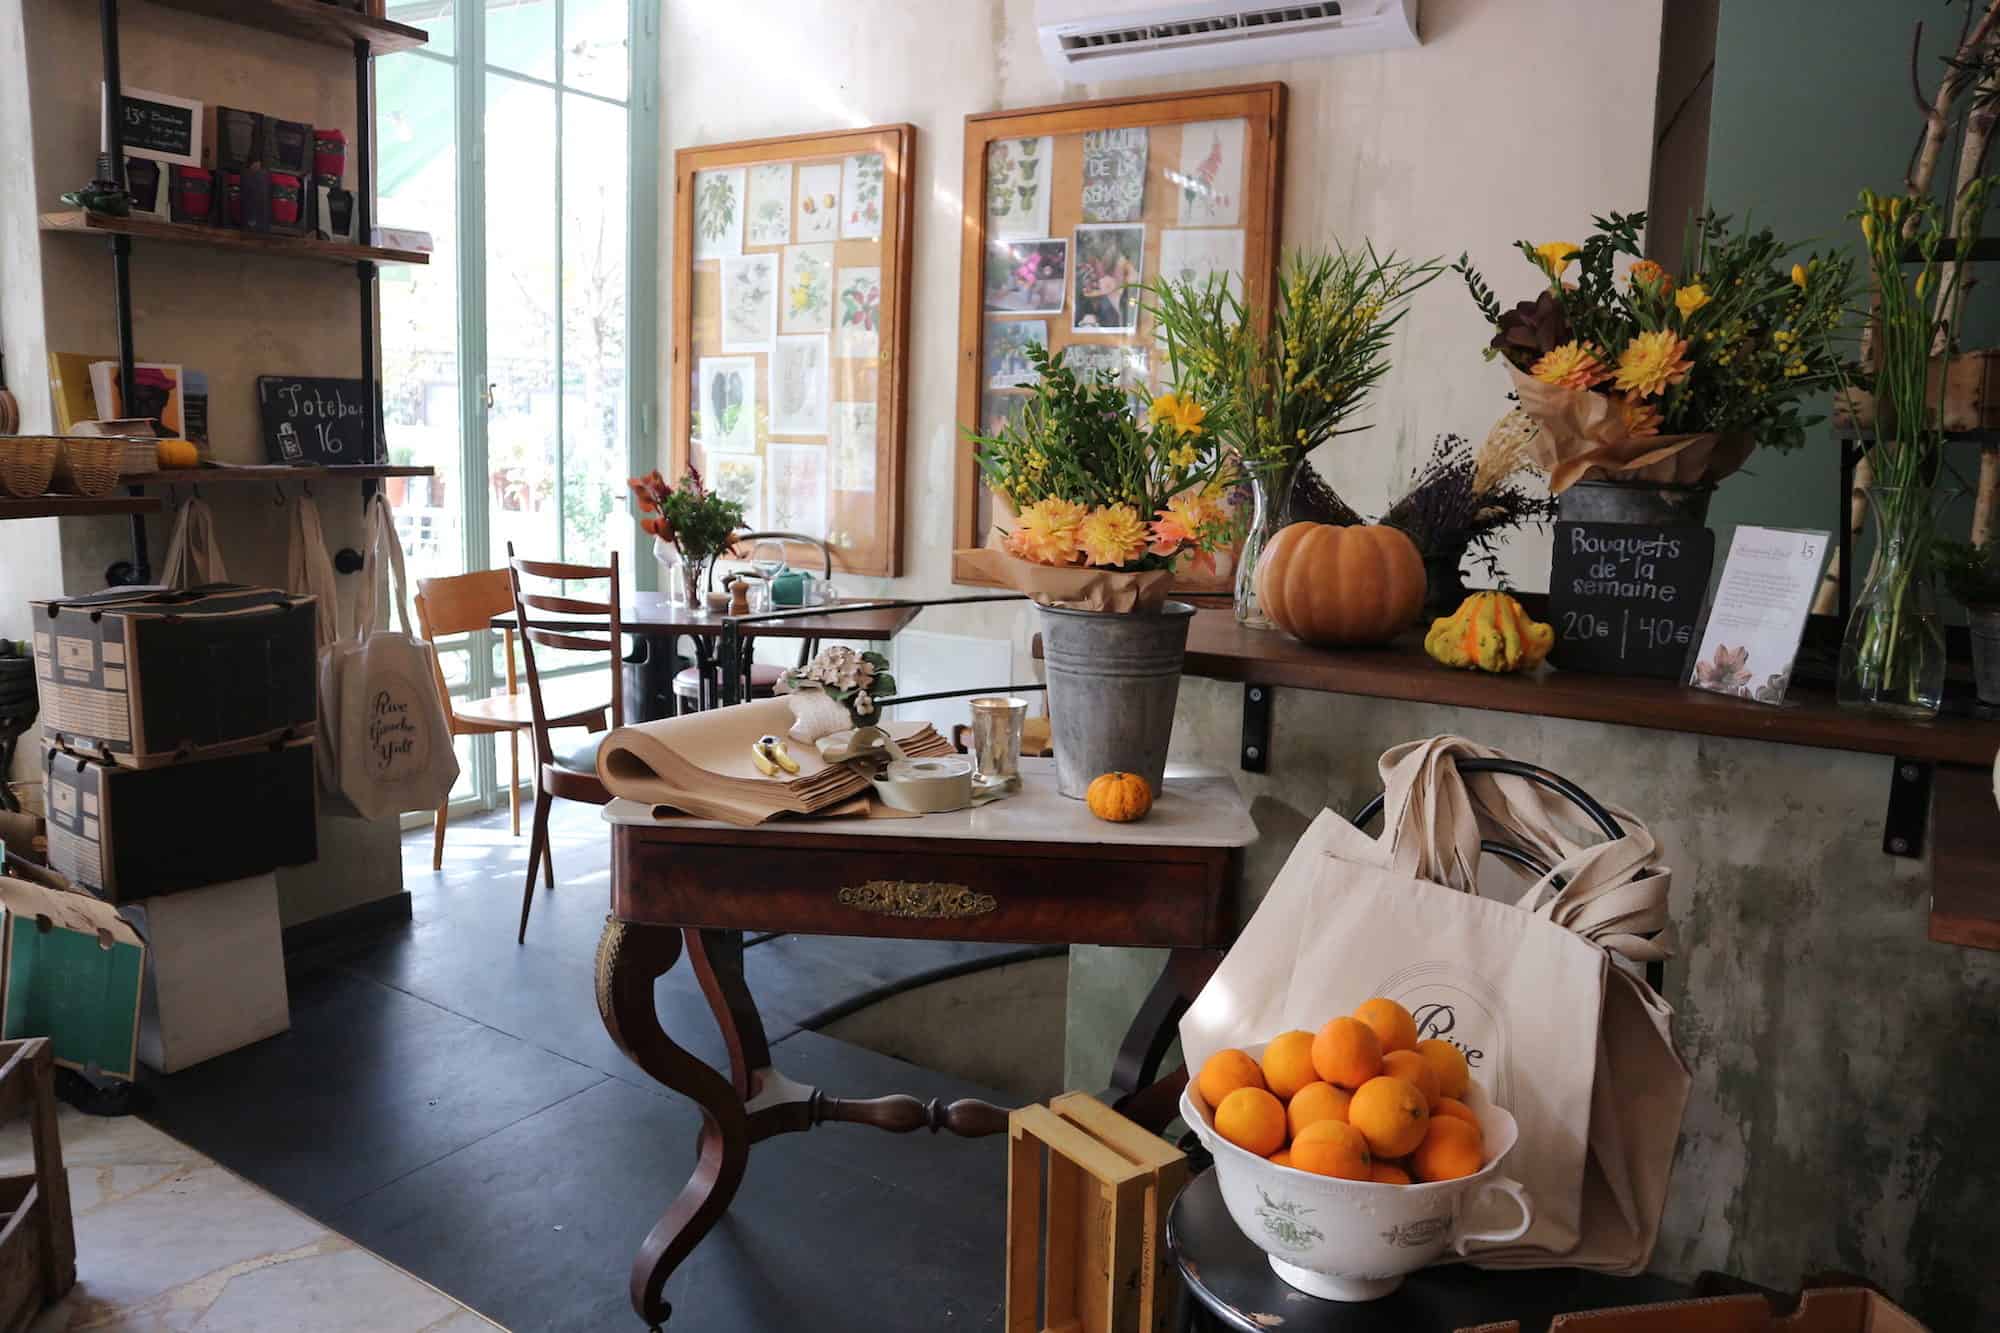 Inside Treize au Jardin coffee shop in Paris, where the rustic decor with plants and fruit reflect the home-made food served here.